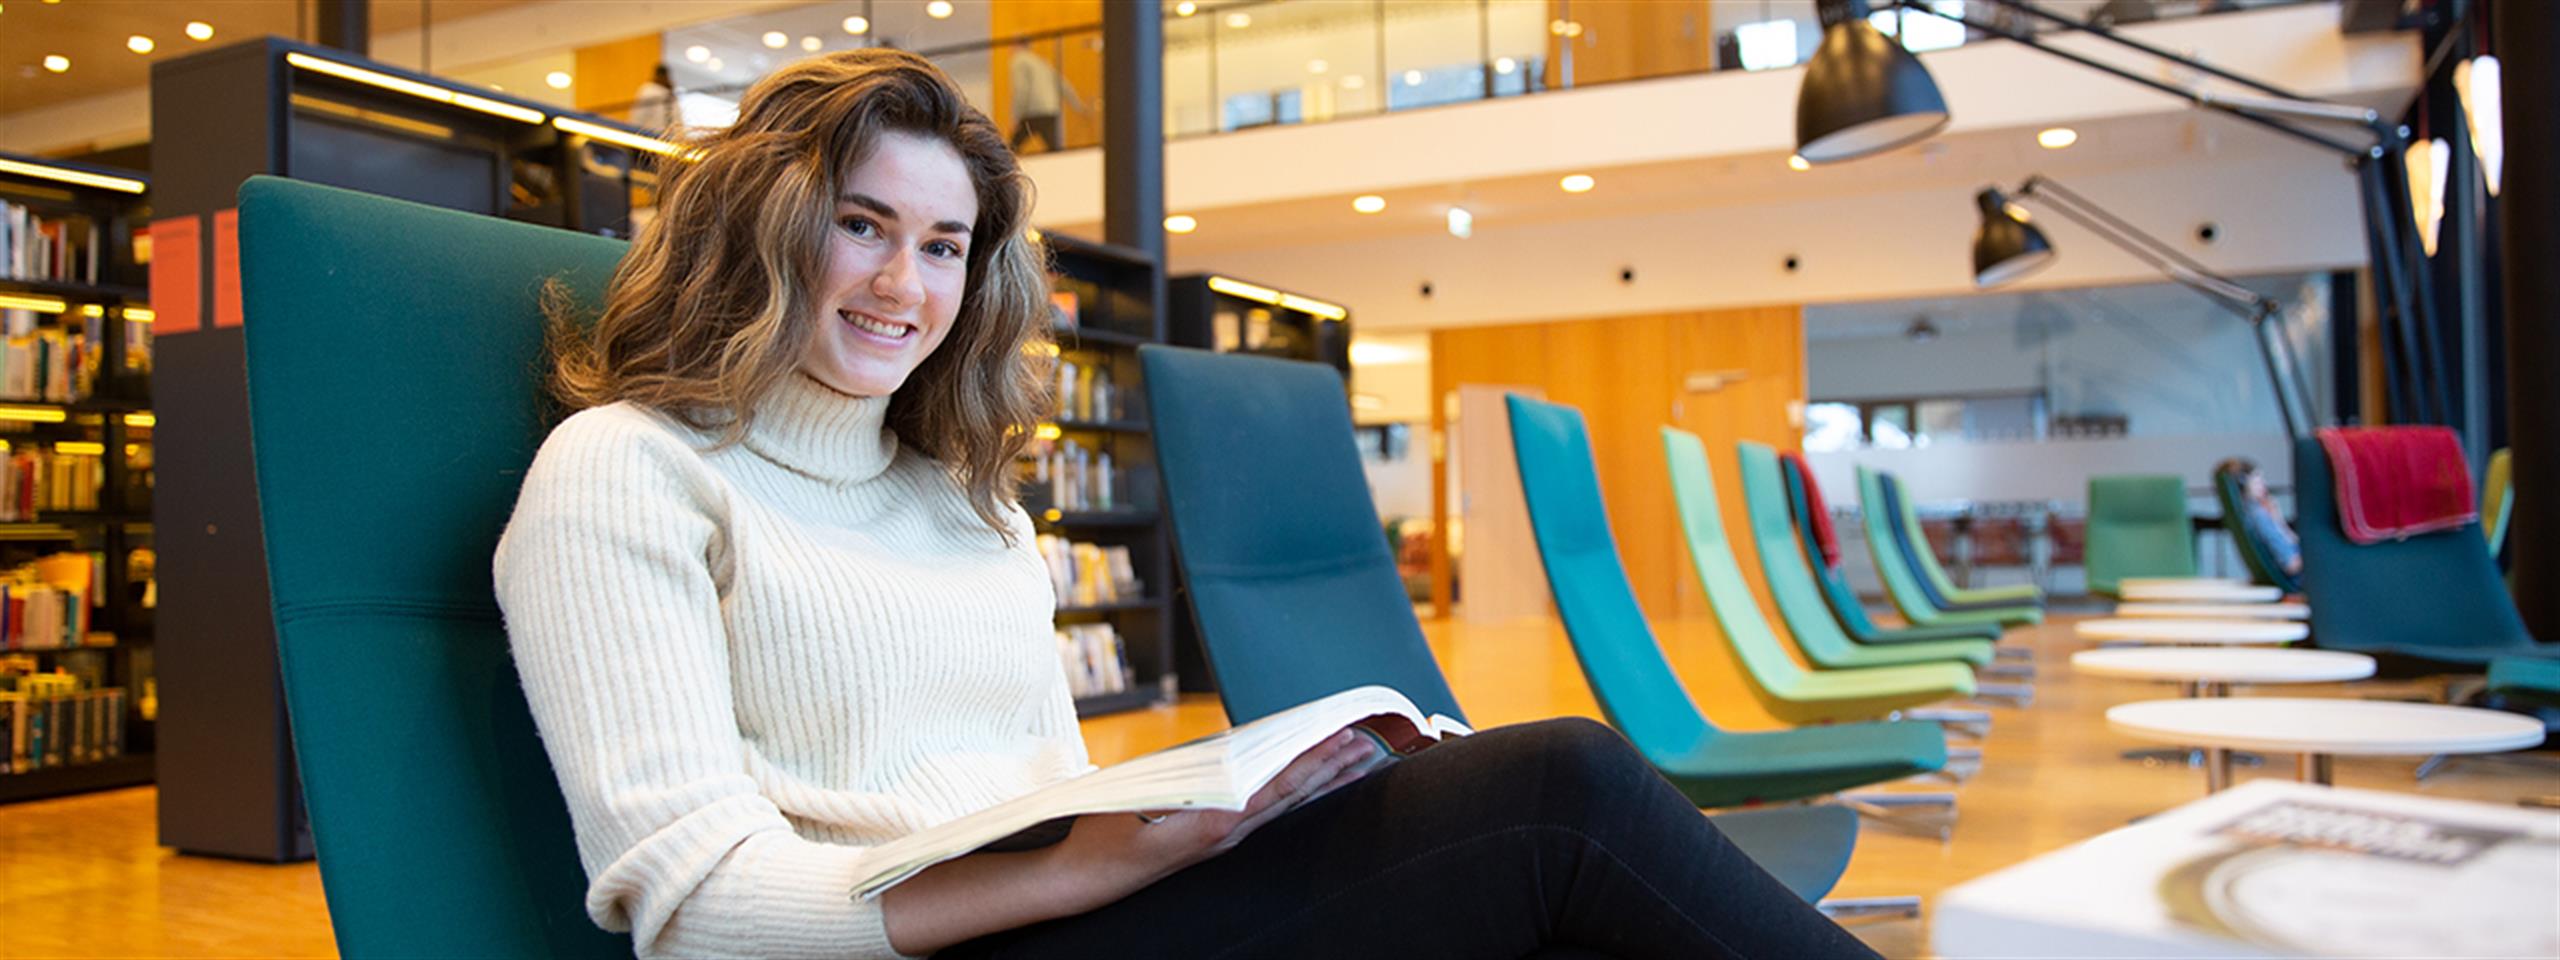 A student sitting in a chair at the library with a book.